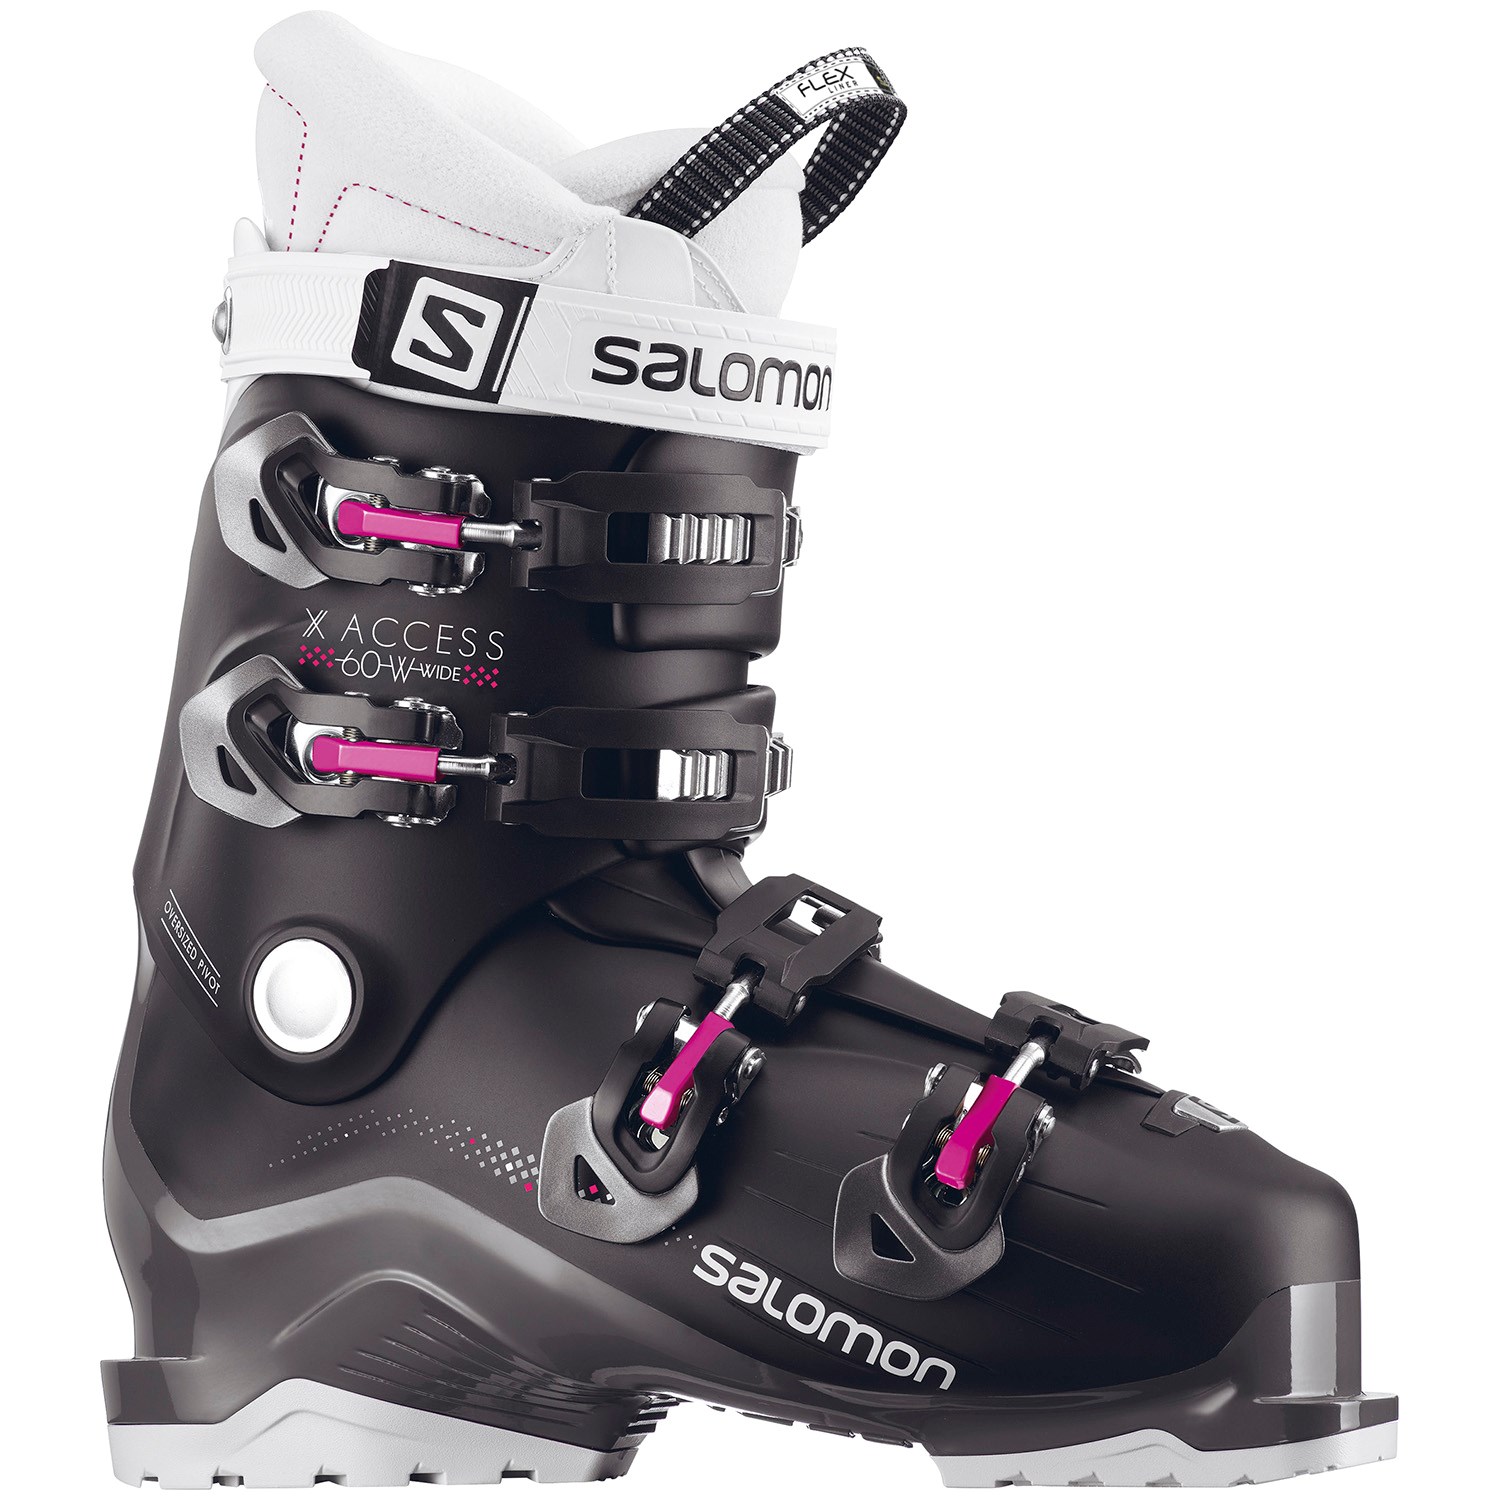 Salomon Ski boots: Ideal For Men And  Women as Well